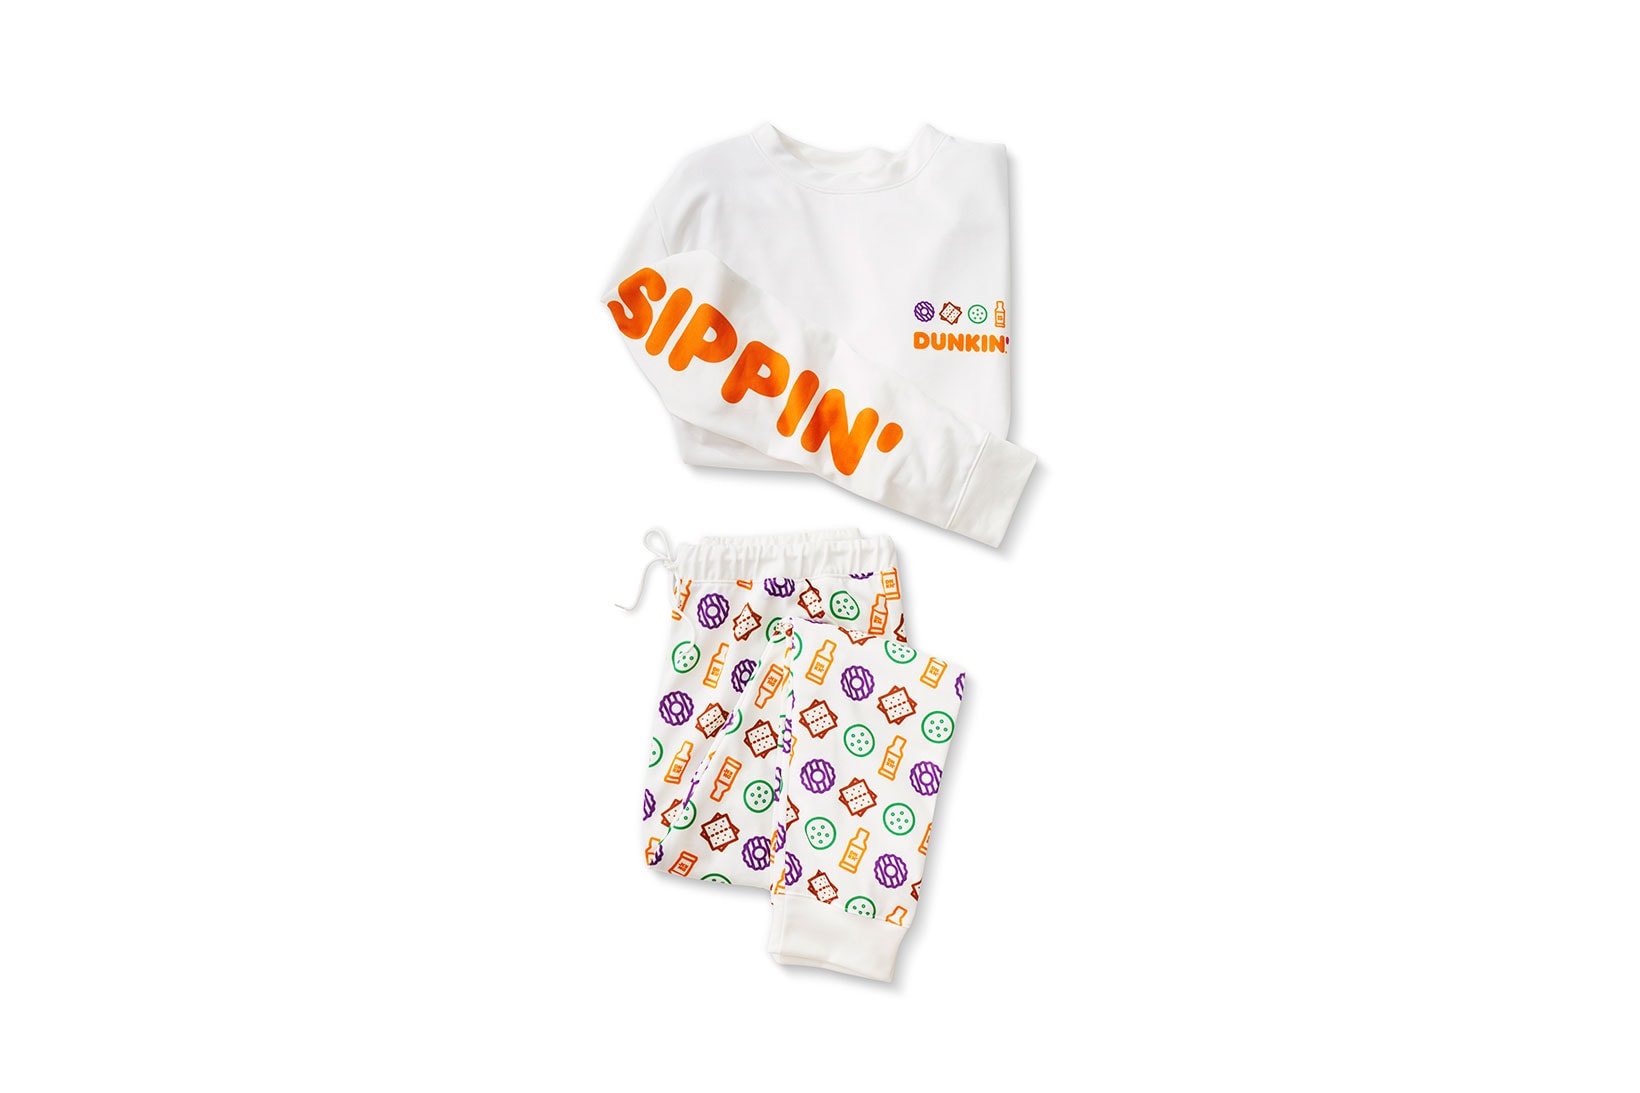 dunkin girl scout cookie collaboration merch chill collection sweater sweatpants